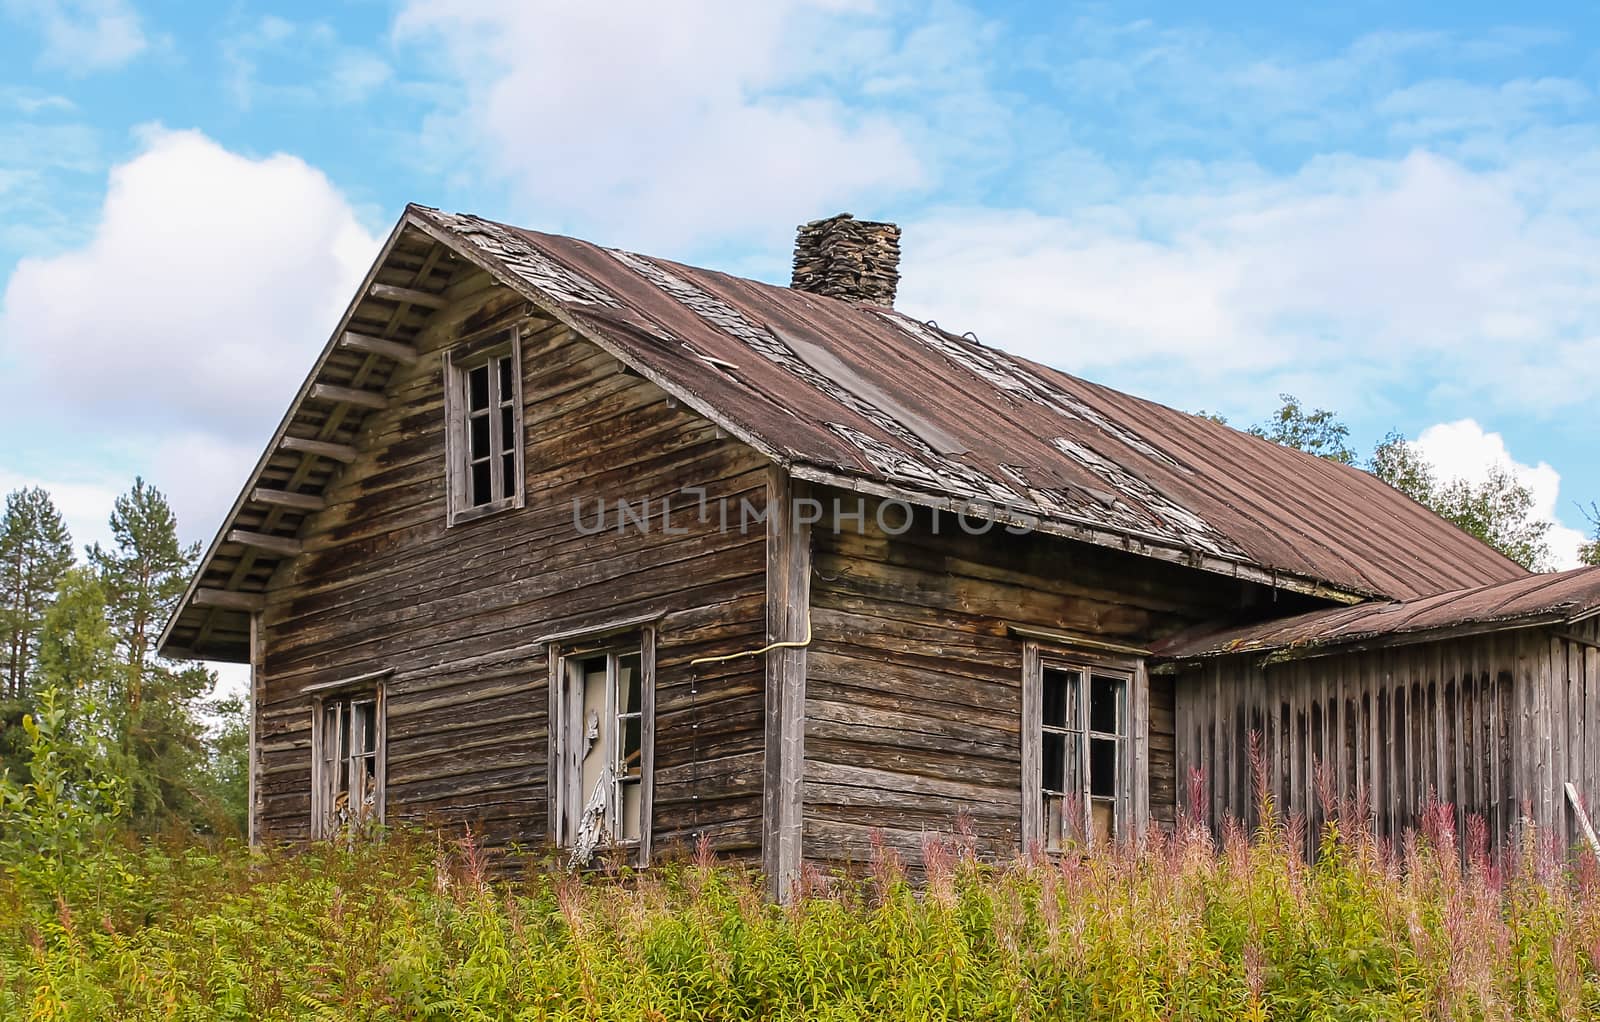 Abandoned old log farmhouse by Alexanderphoto